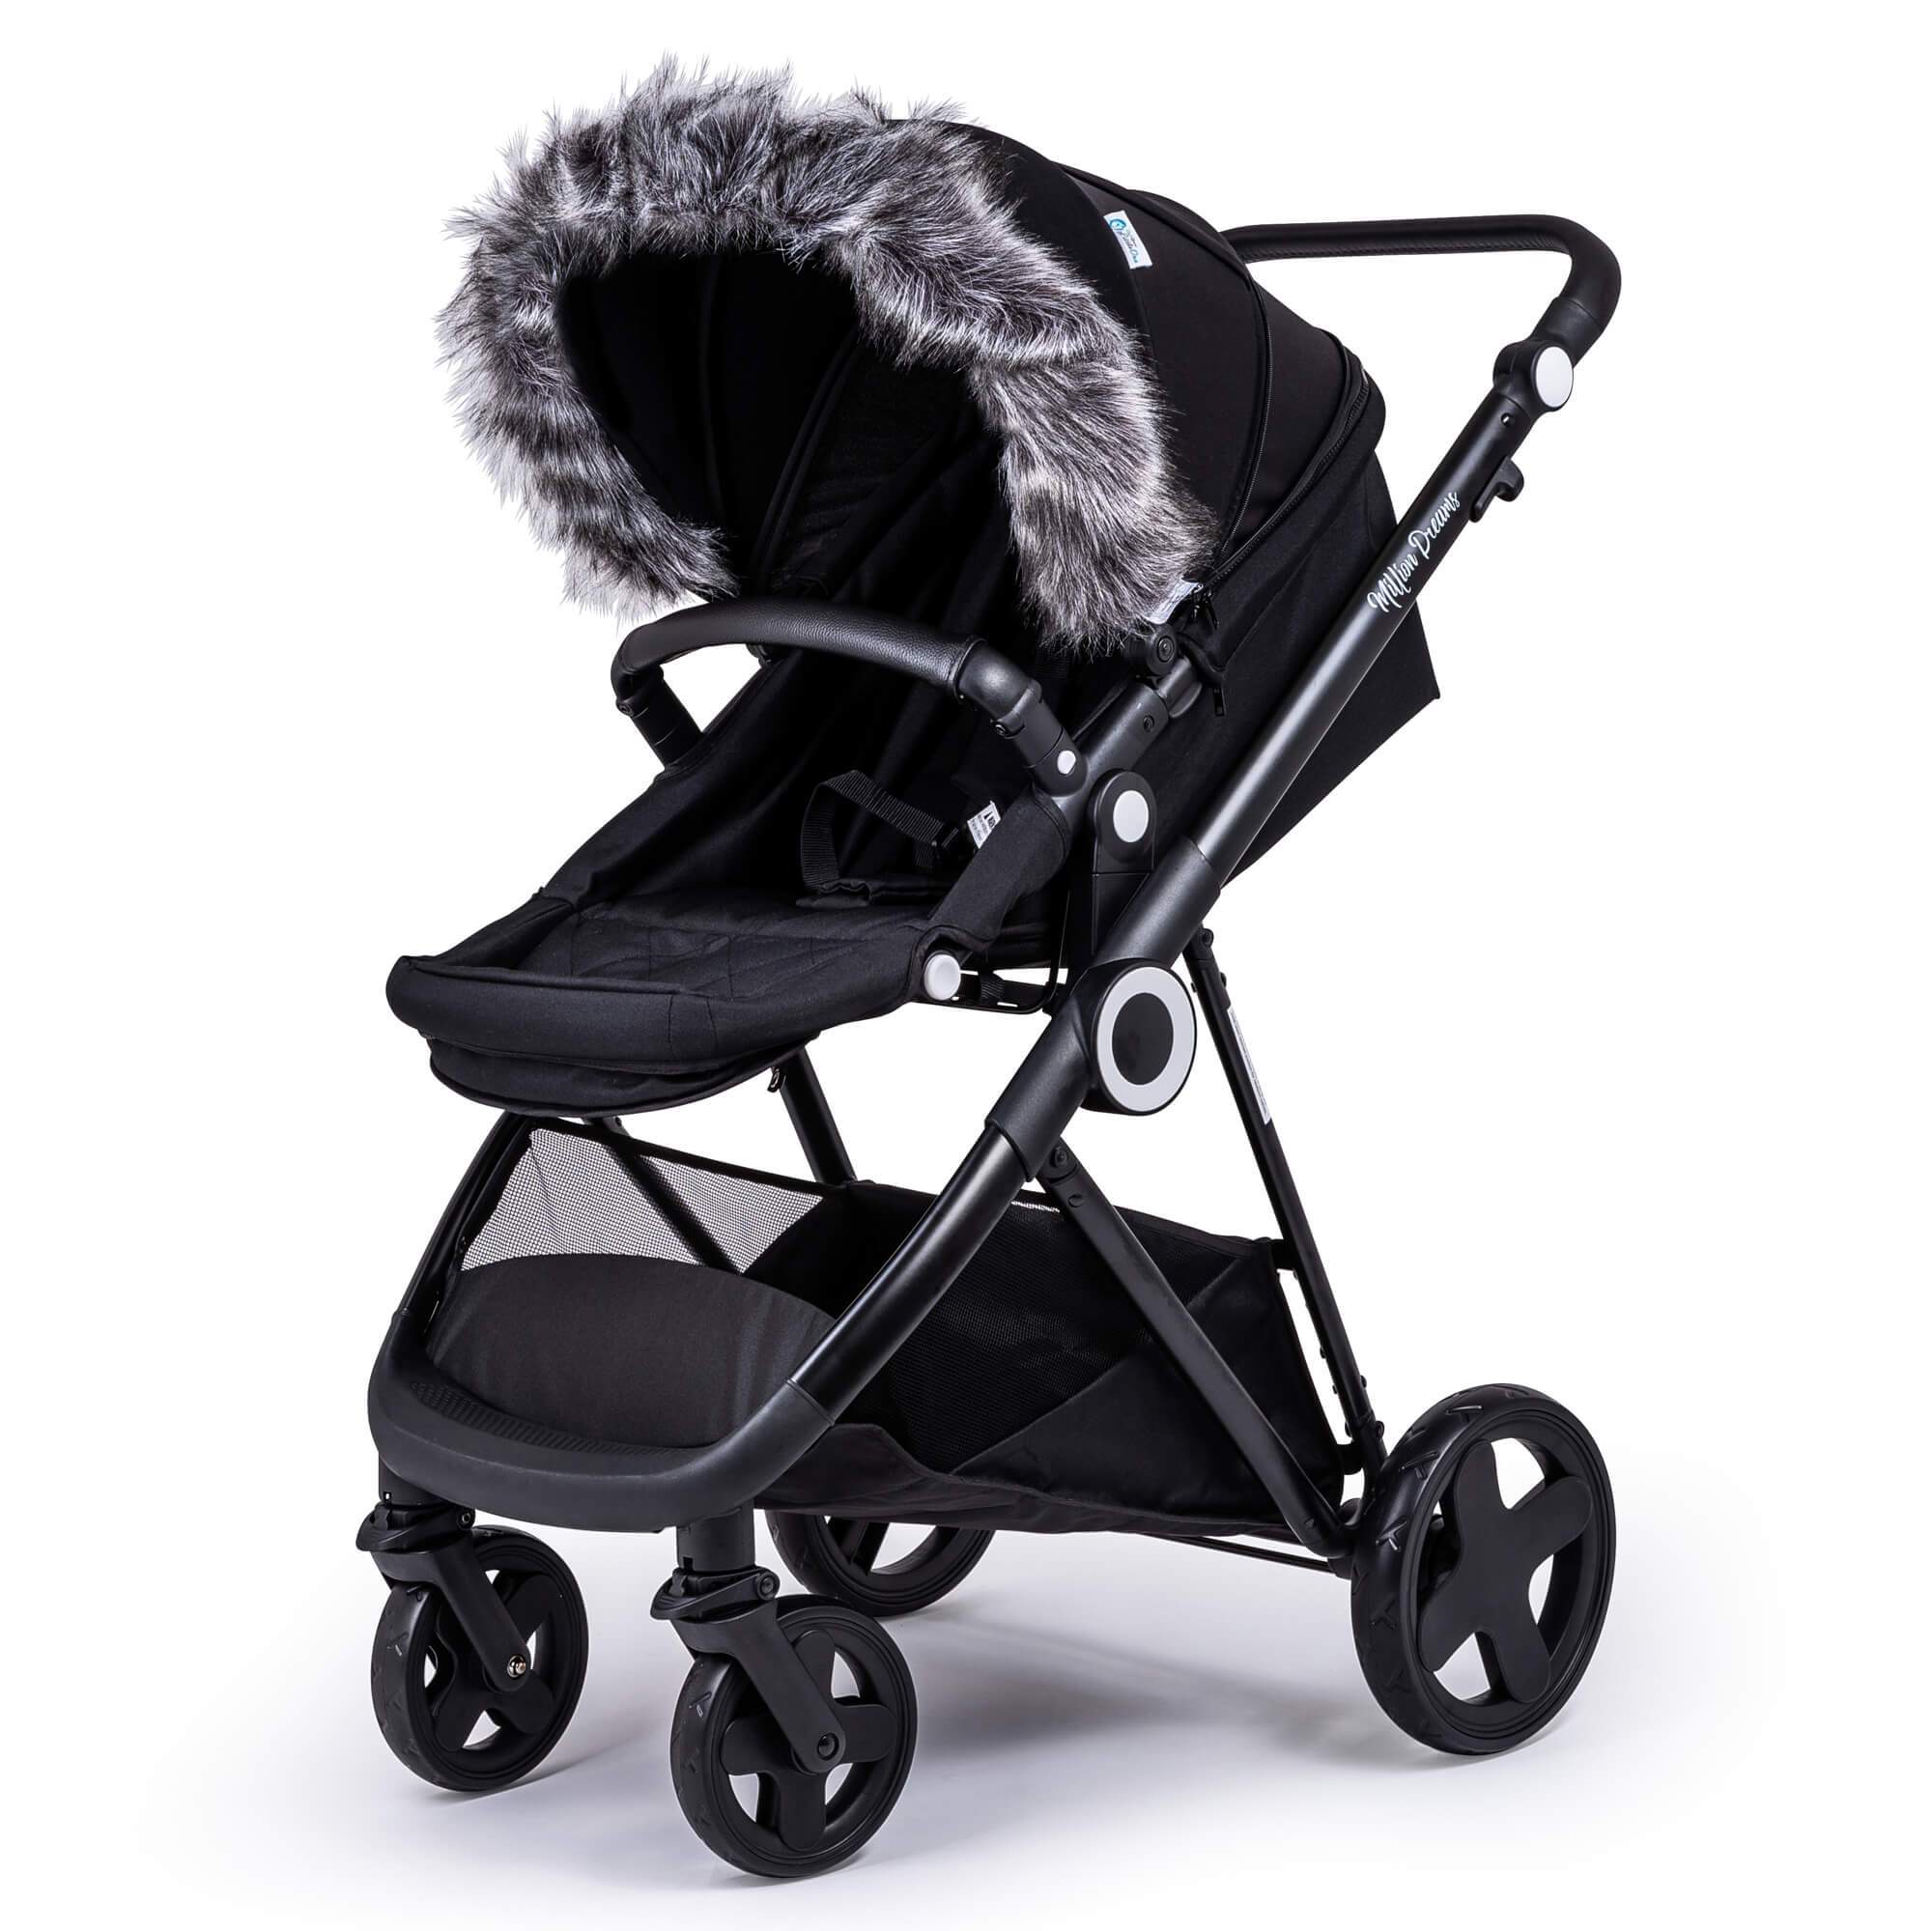 Pram Fur Hood Trim Attachment for Pushchair Compatible with Koelstra - Dark Grey / Fits All Models | For Your Little One